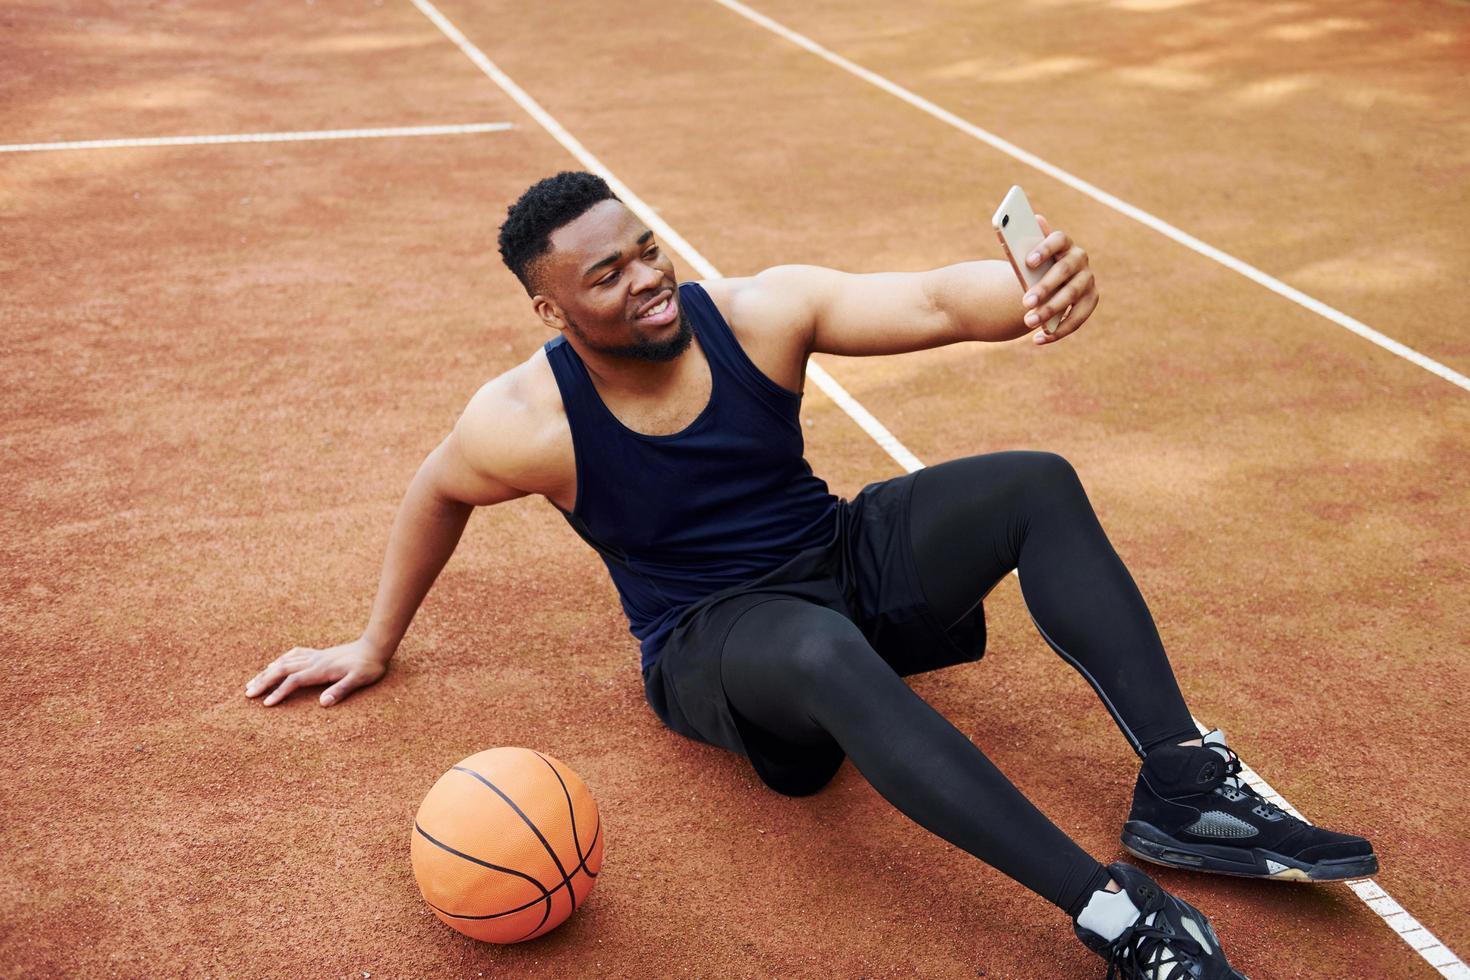 Making selfie. African american man plays basketball on the court outdoors photo